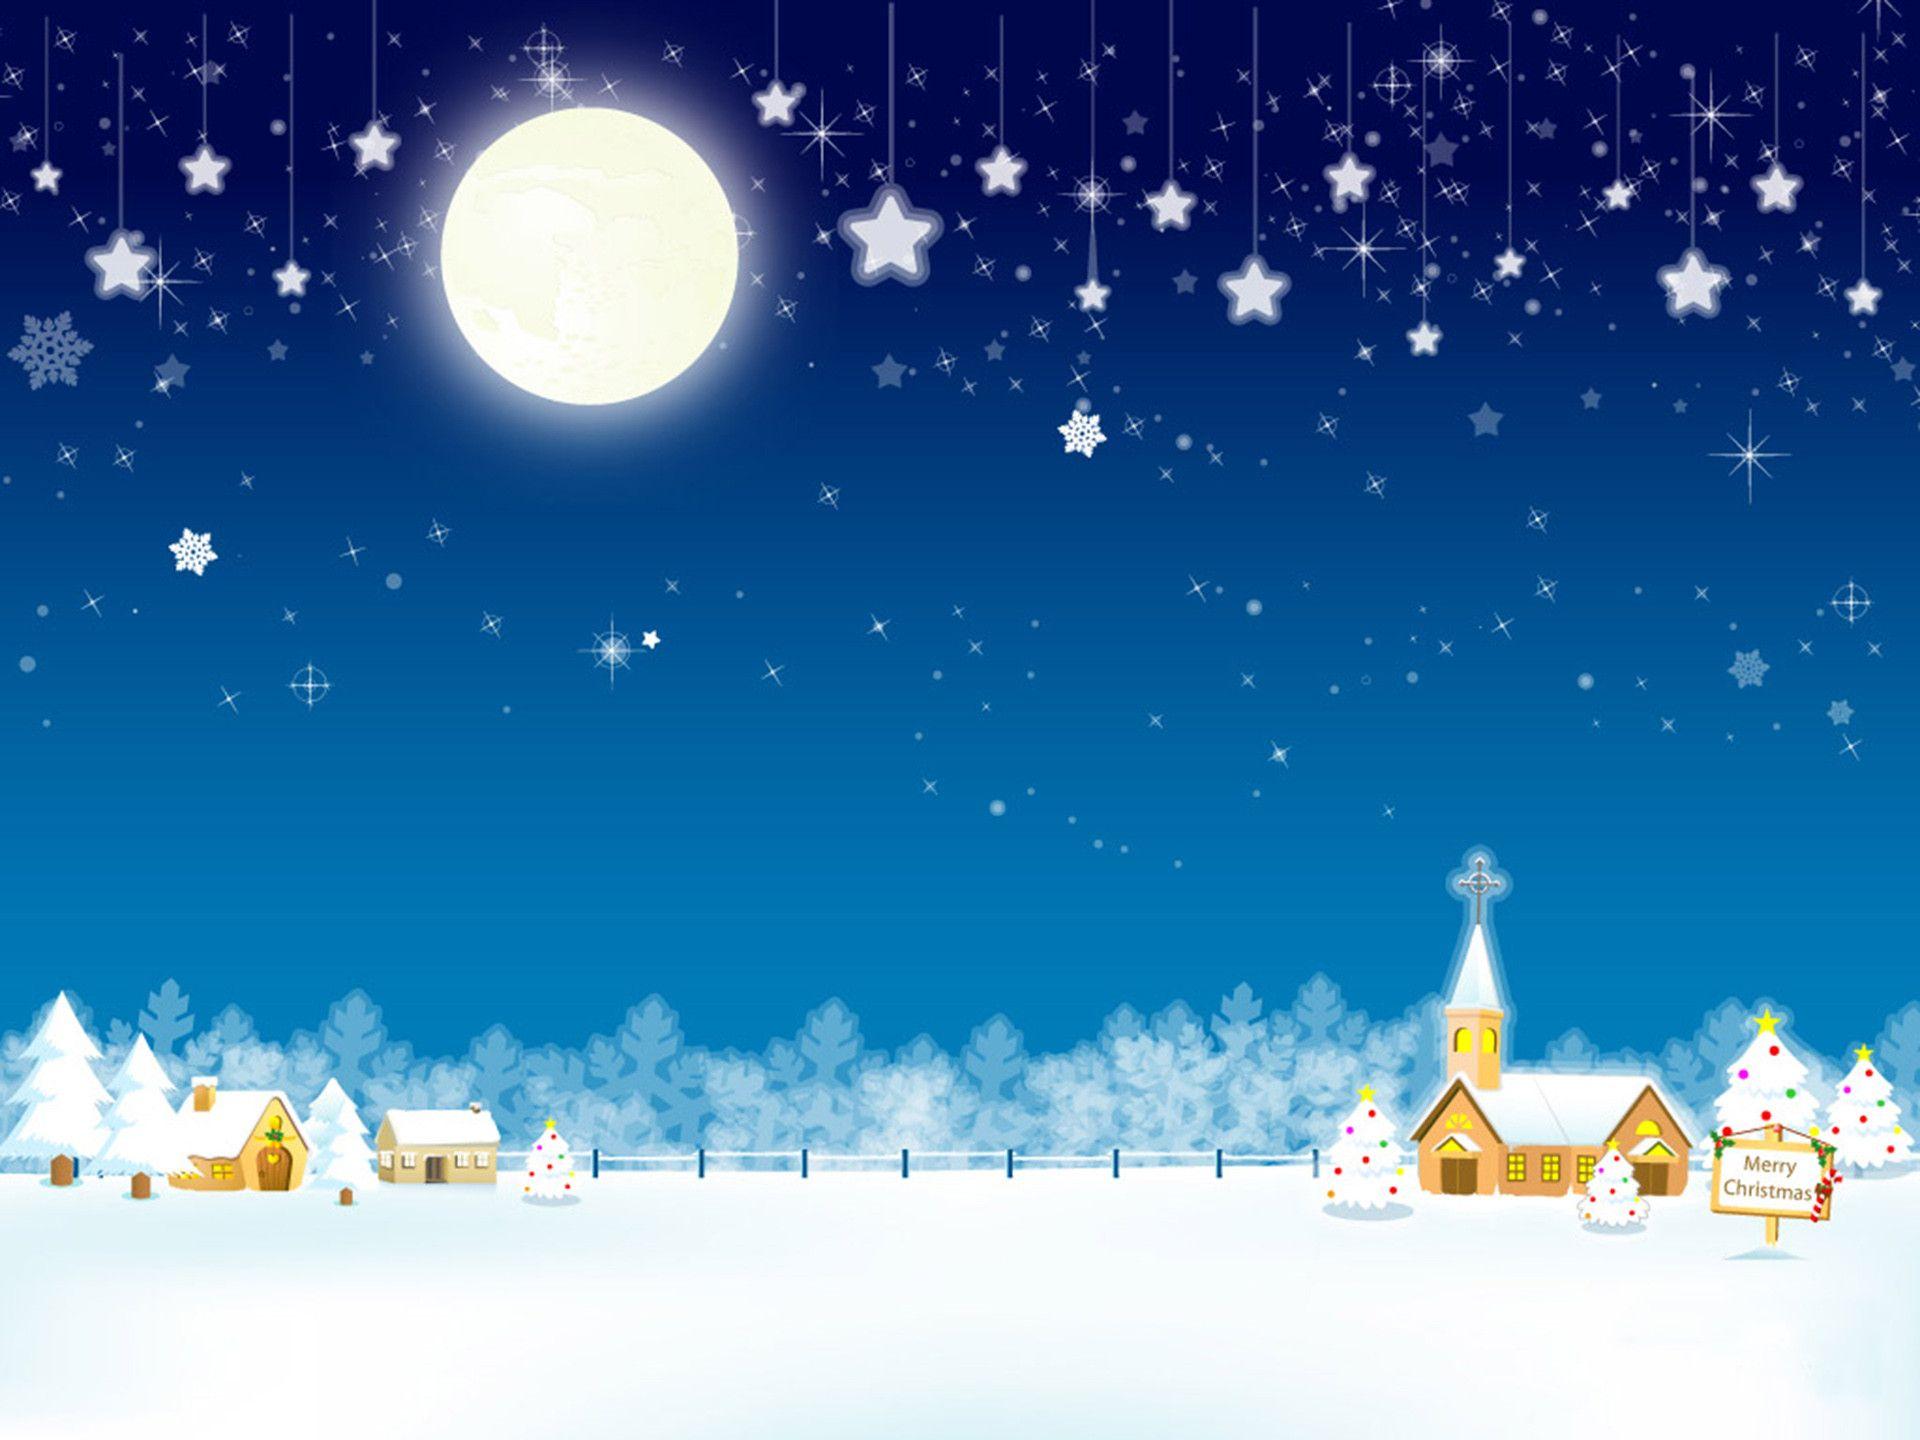 New Merry Christmas Cool Background. Download Free Word, Excel, PDF